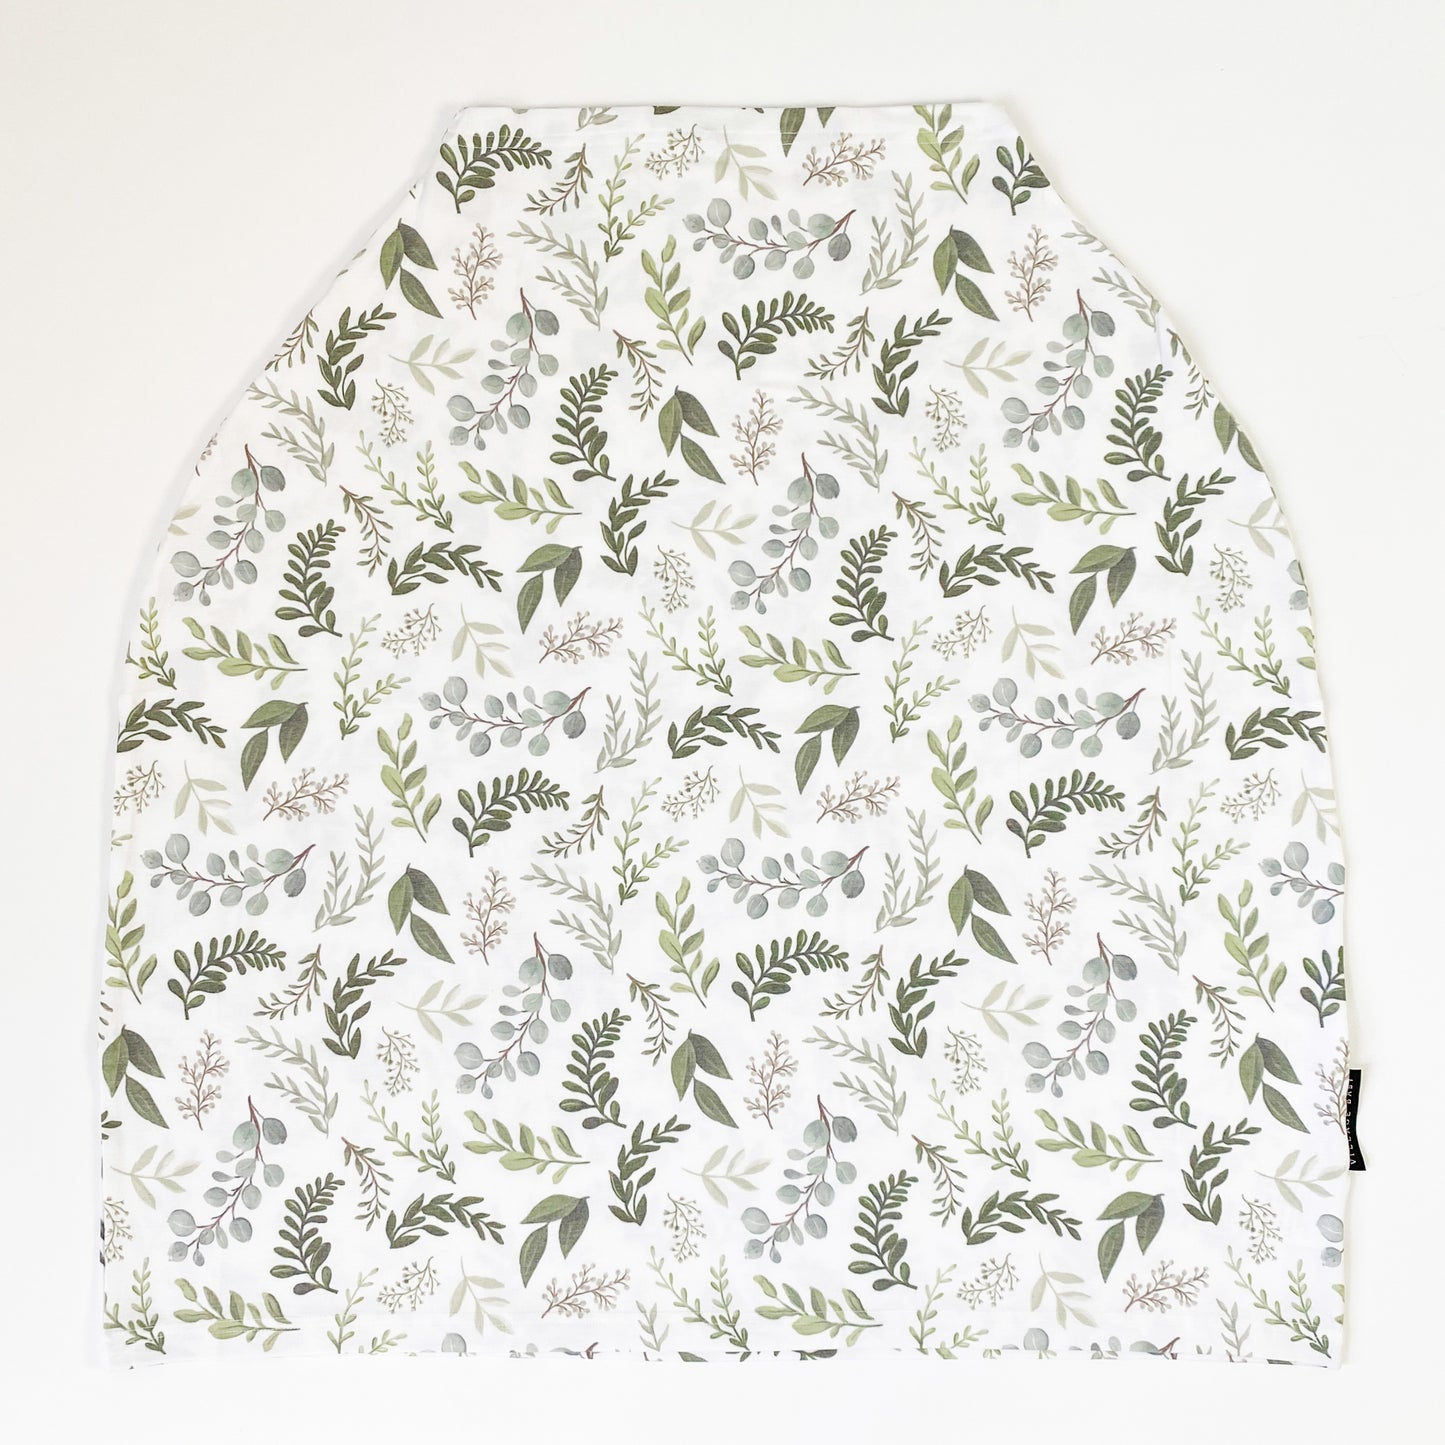 Extra Soft and Stretchy Nursing and Carseat Cover: Graceful Greenery